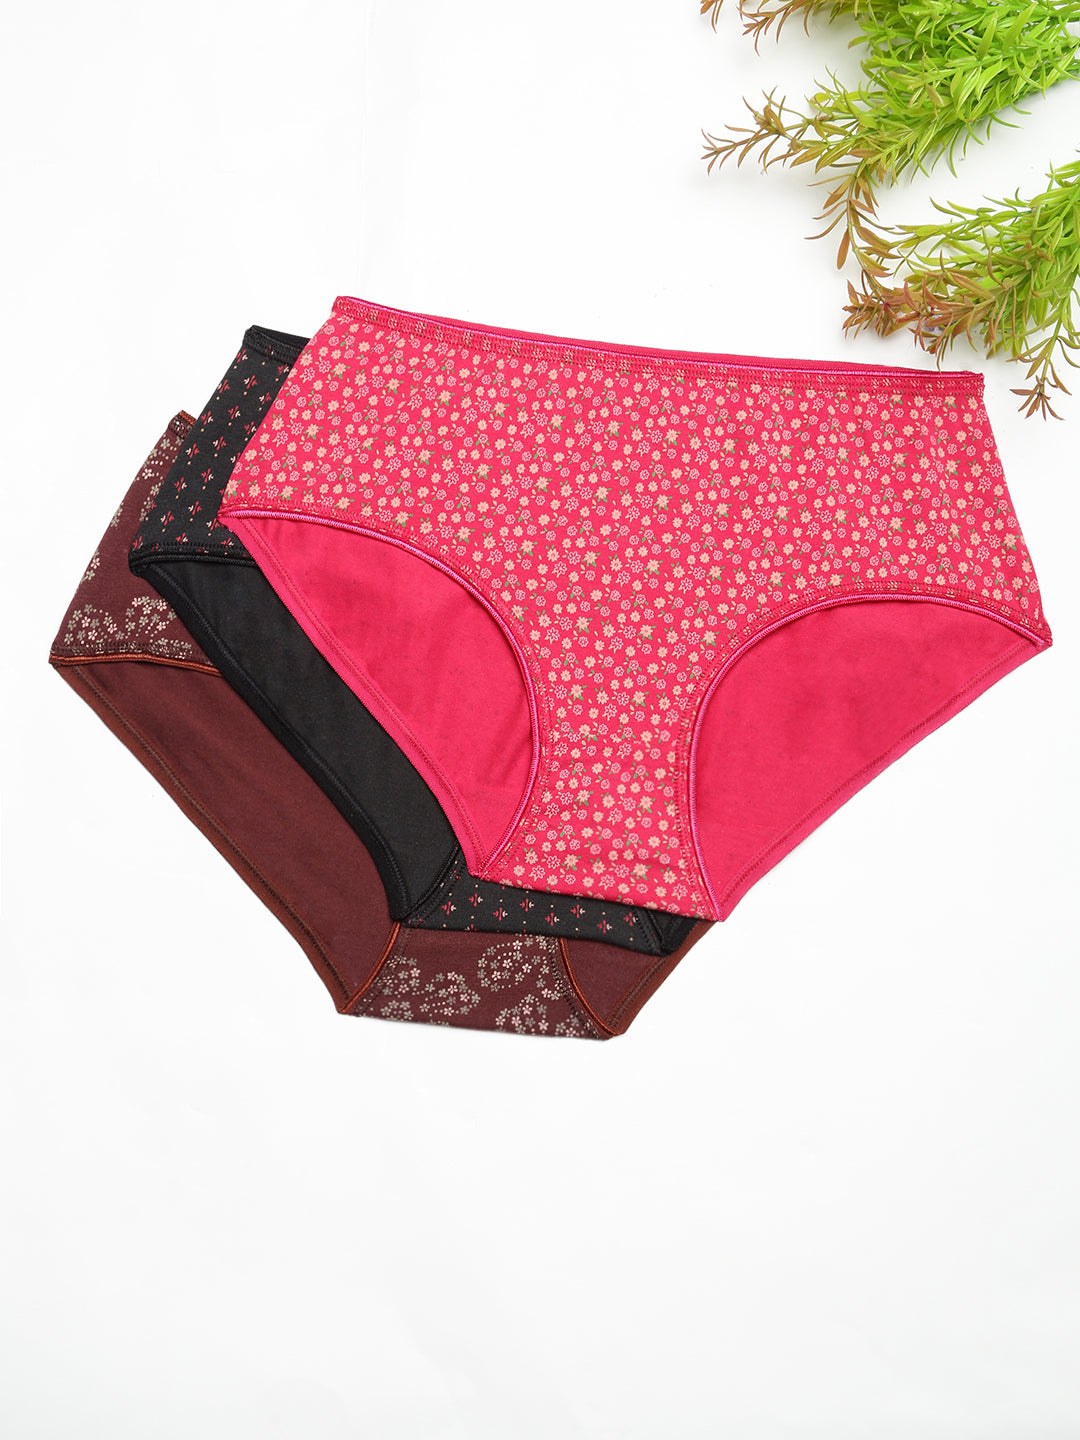 Get the Best Prisma High Waist Panty Combo with OE-Outer Elastic (PO3) -  Set of 8!